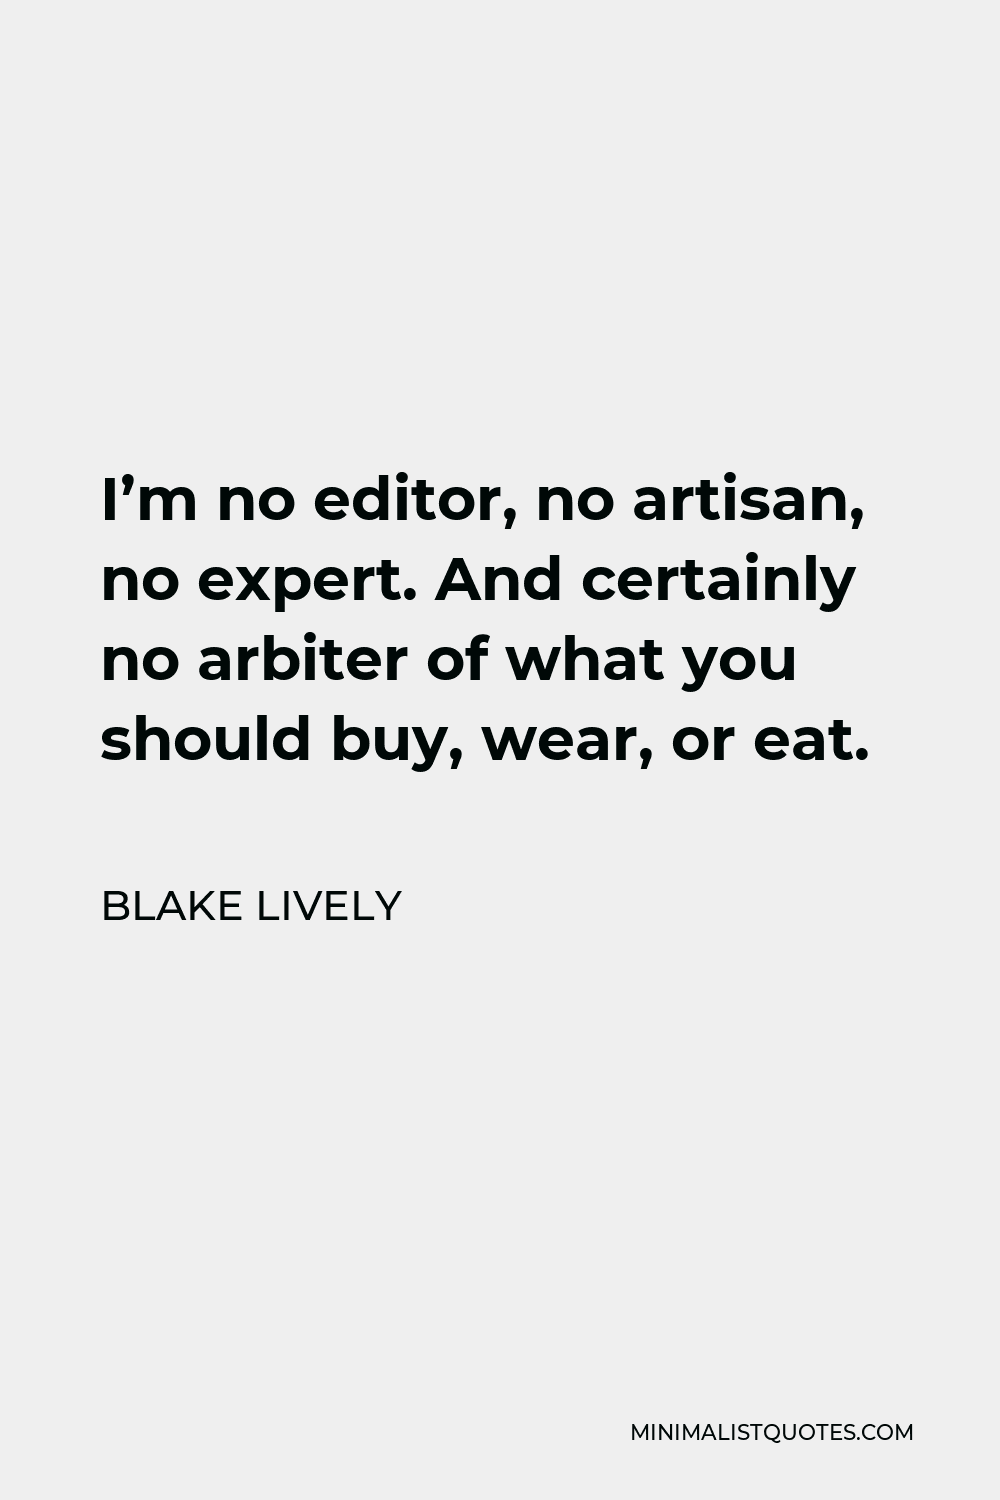 Blake Lively Quote - I’m no editor, no artisan, no expert. And certainly no arbiter of what you should buy, wear, or eat.